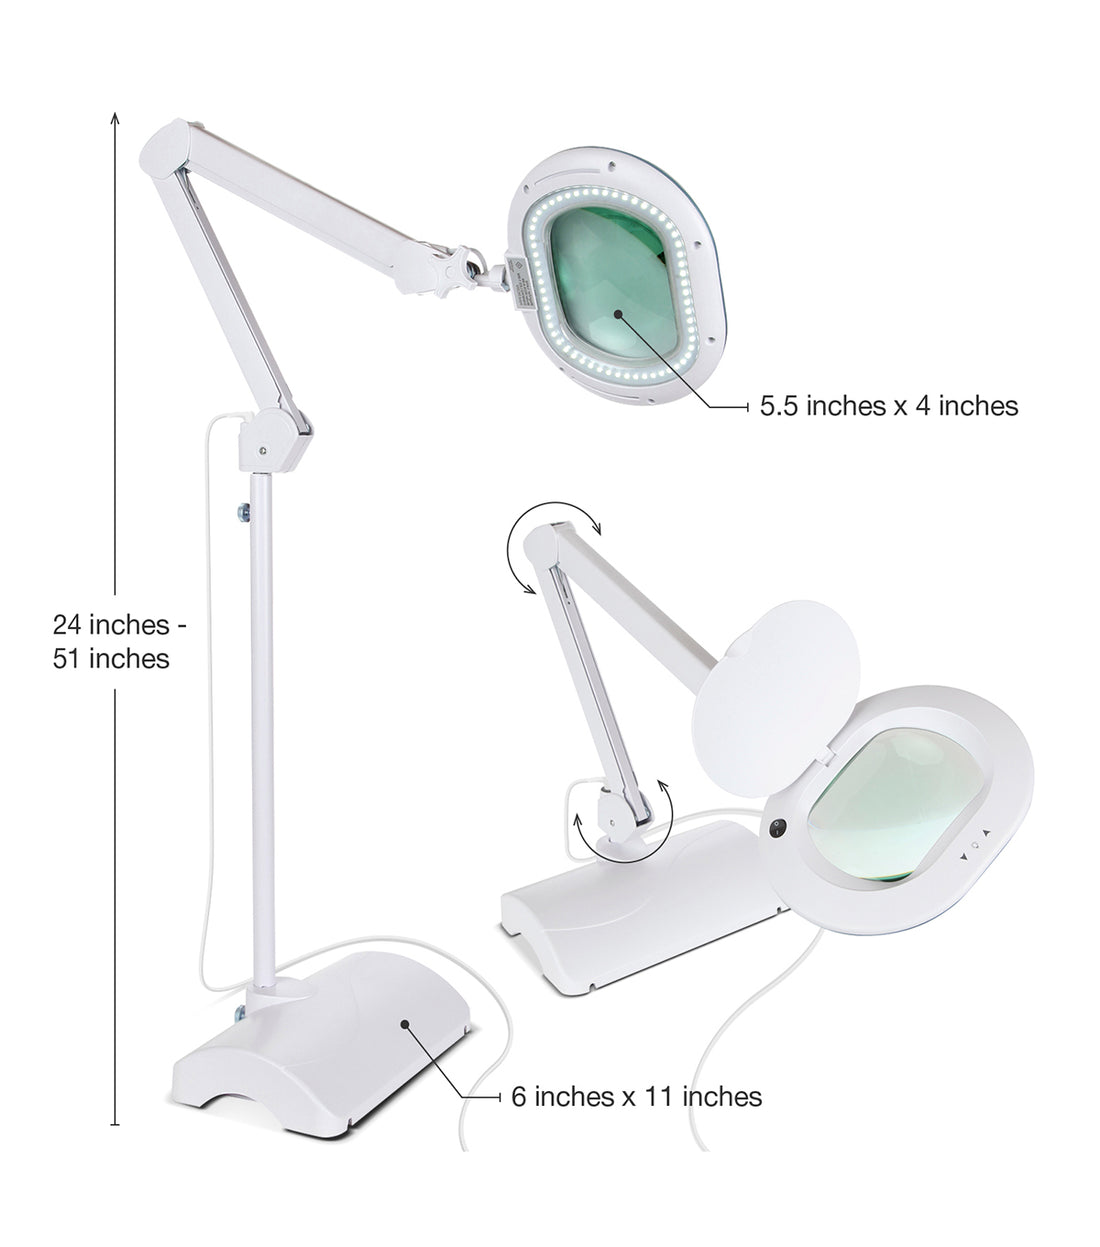 Brightech LightView Pro 2 in 1 XL Magnifying Floor Lamp - Very Bright LED Light with Full Page Magnifier Glass for Pro Tasks, Reading, Crafts & Hobbies - Converts from Standing to Table Lamp